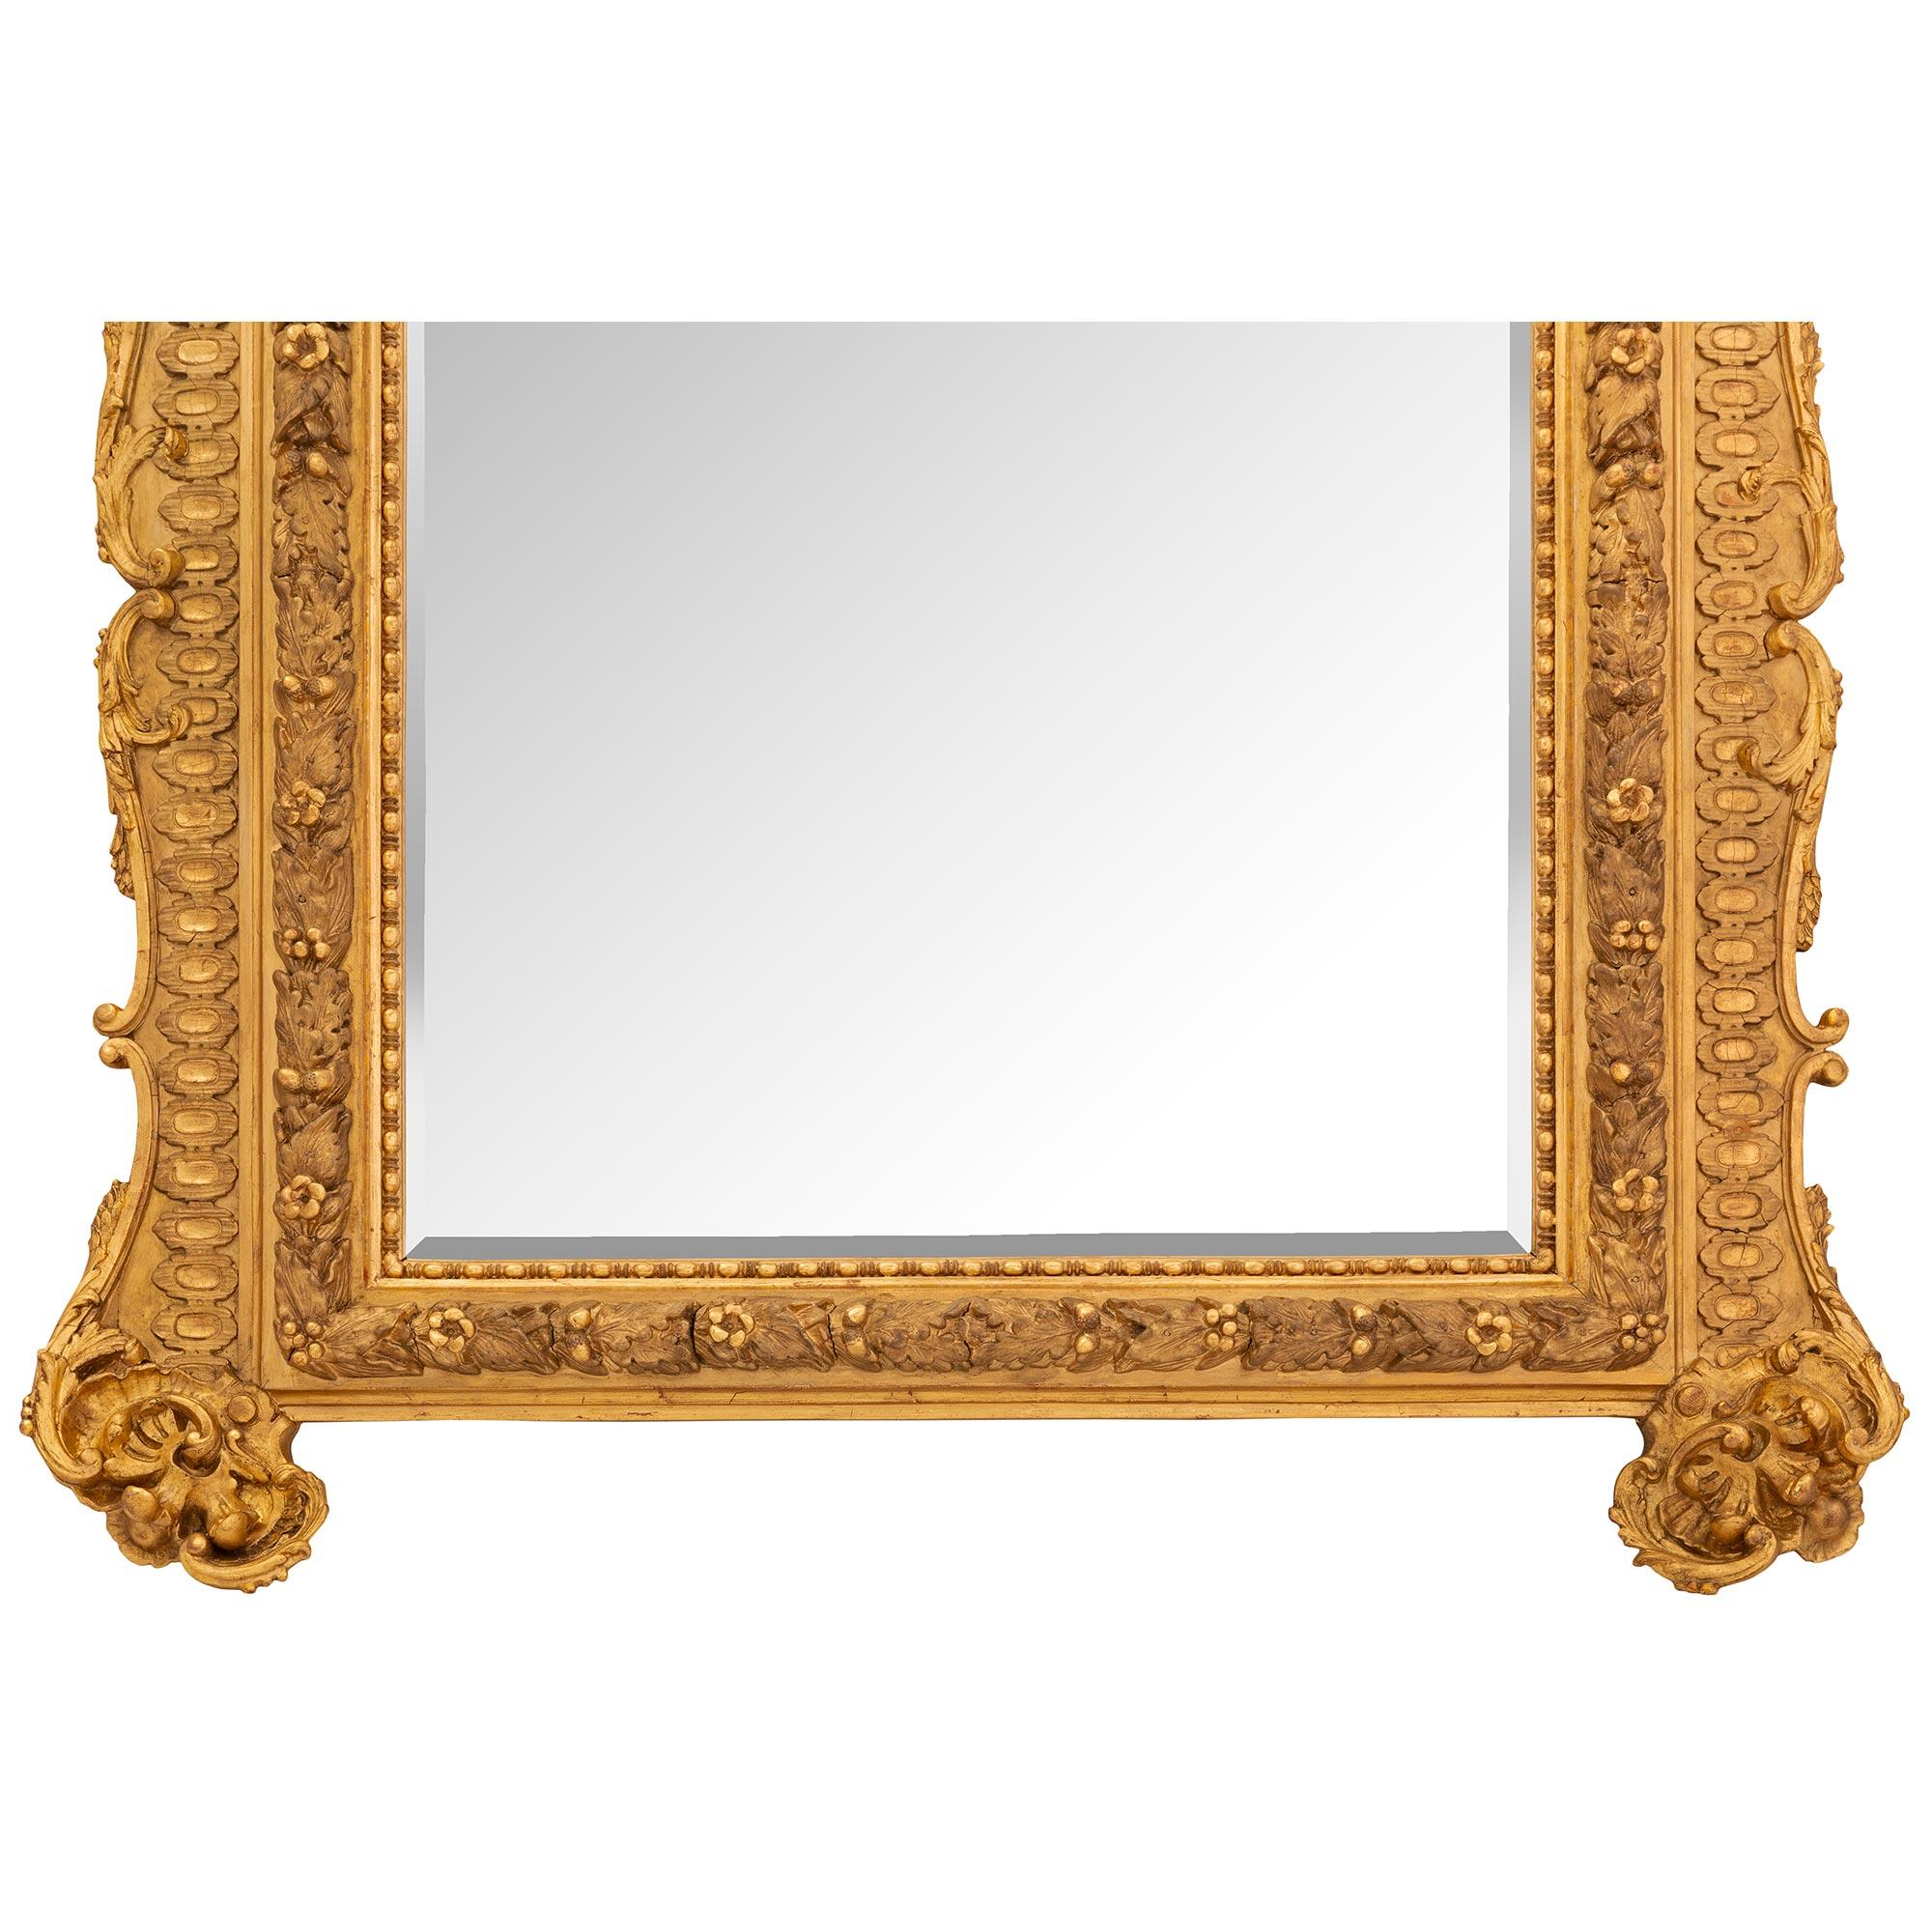 French Mid-19th Century Louis XV Rectangular Giltwood Mirror For Sale 3